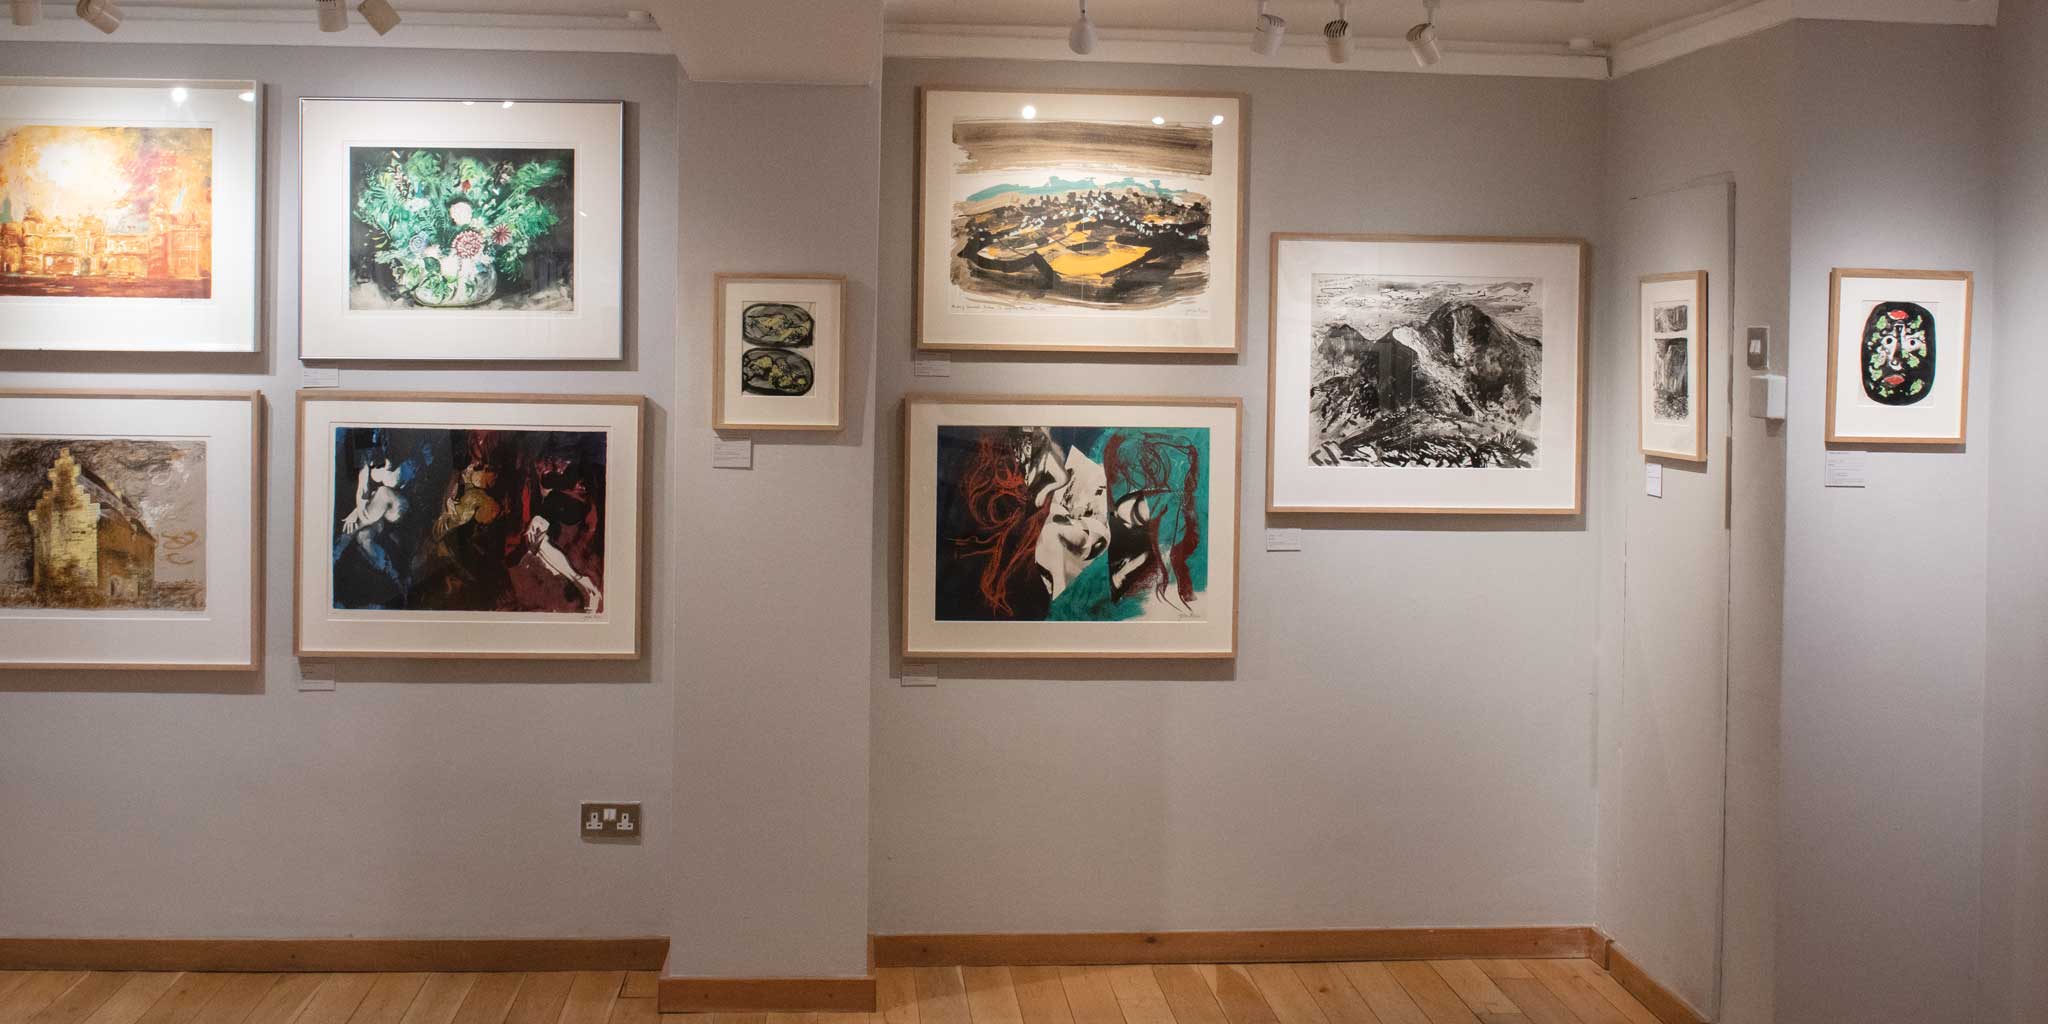 John Piper Exhibition of Original Paintings and Signed Limited Edition Prints